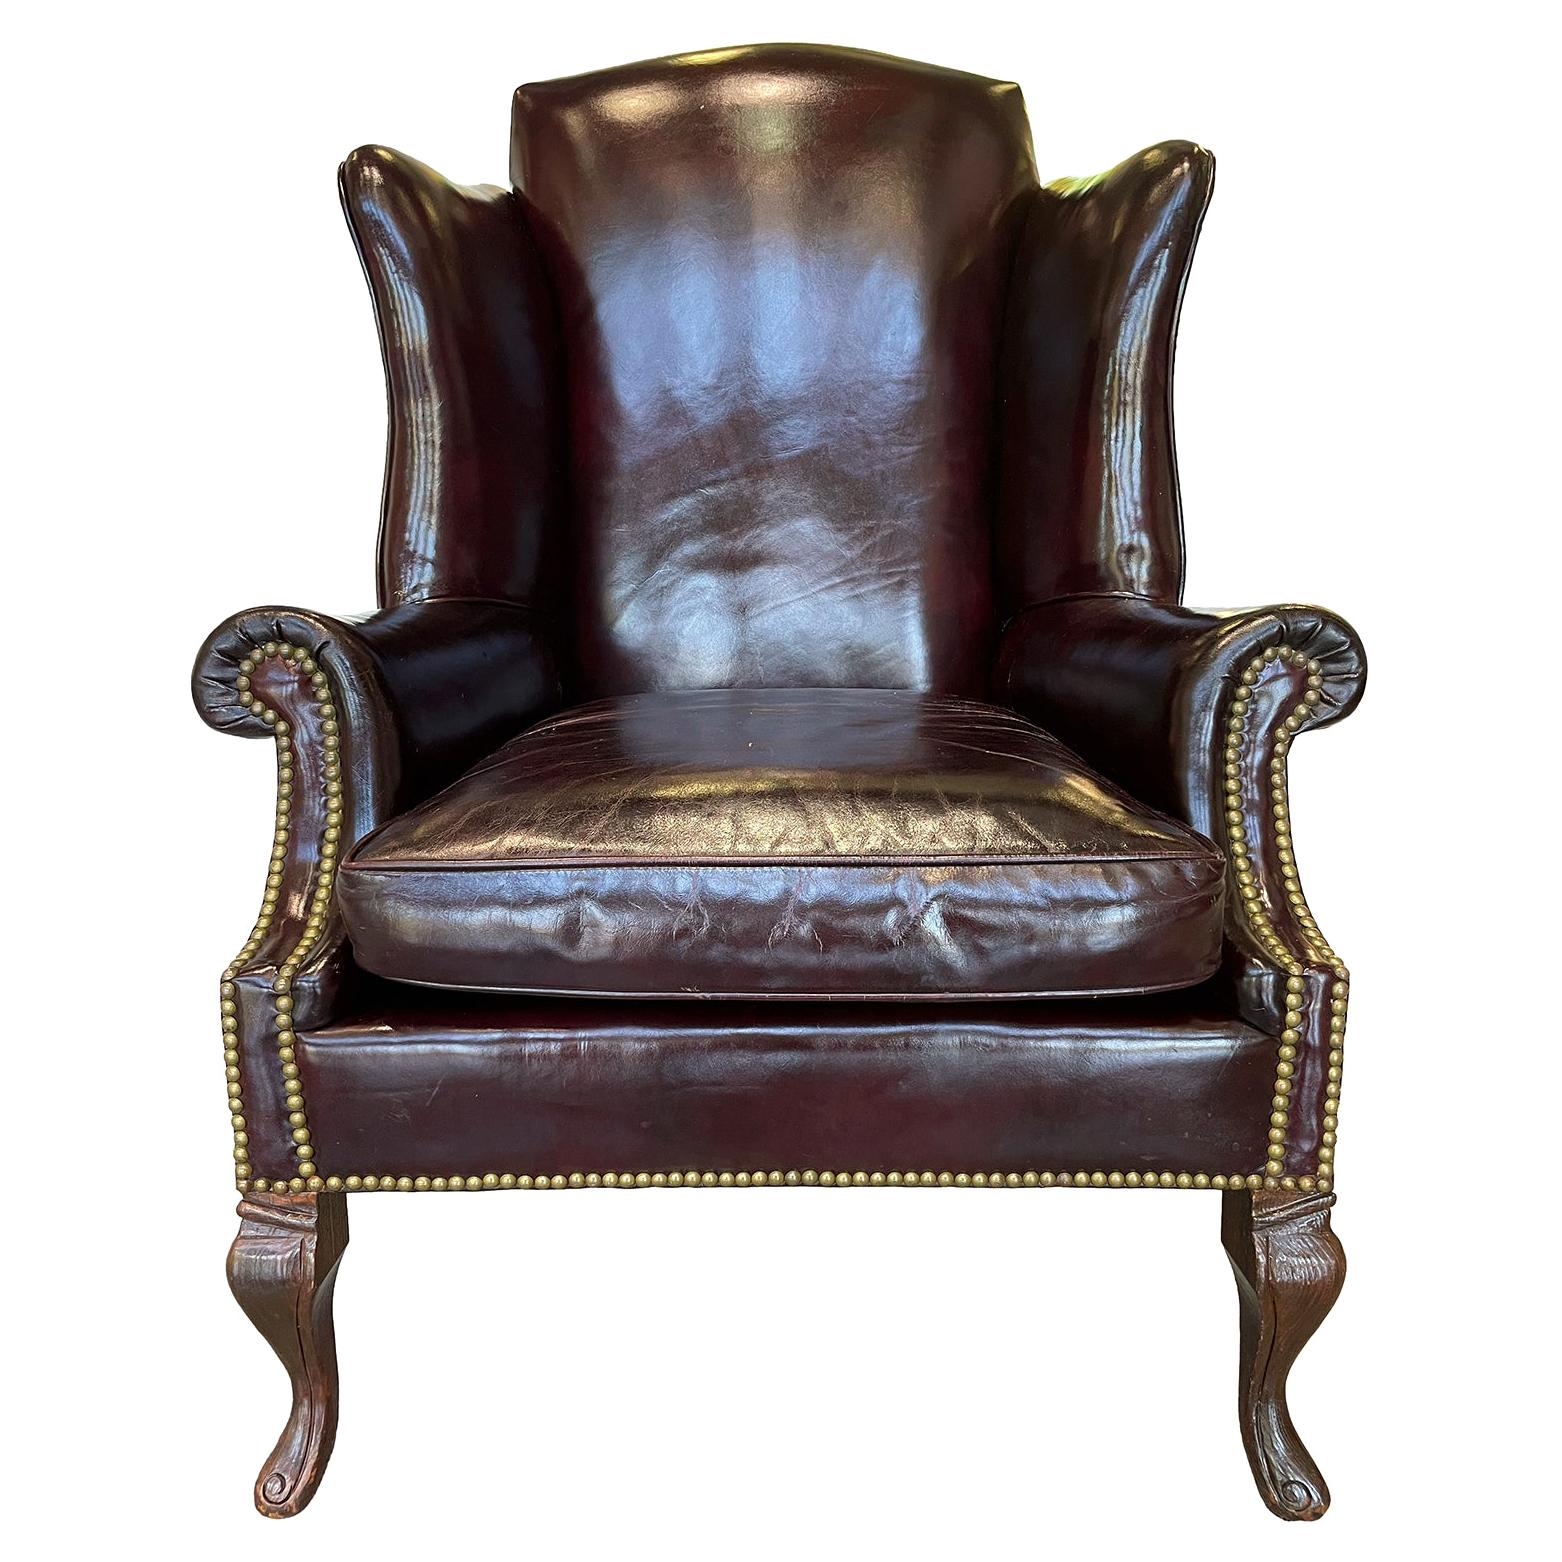 Antique Leather Wingback Armchair